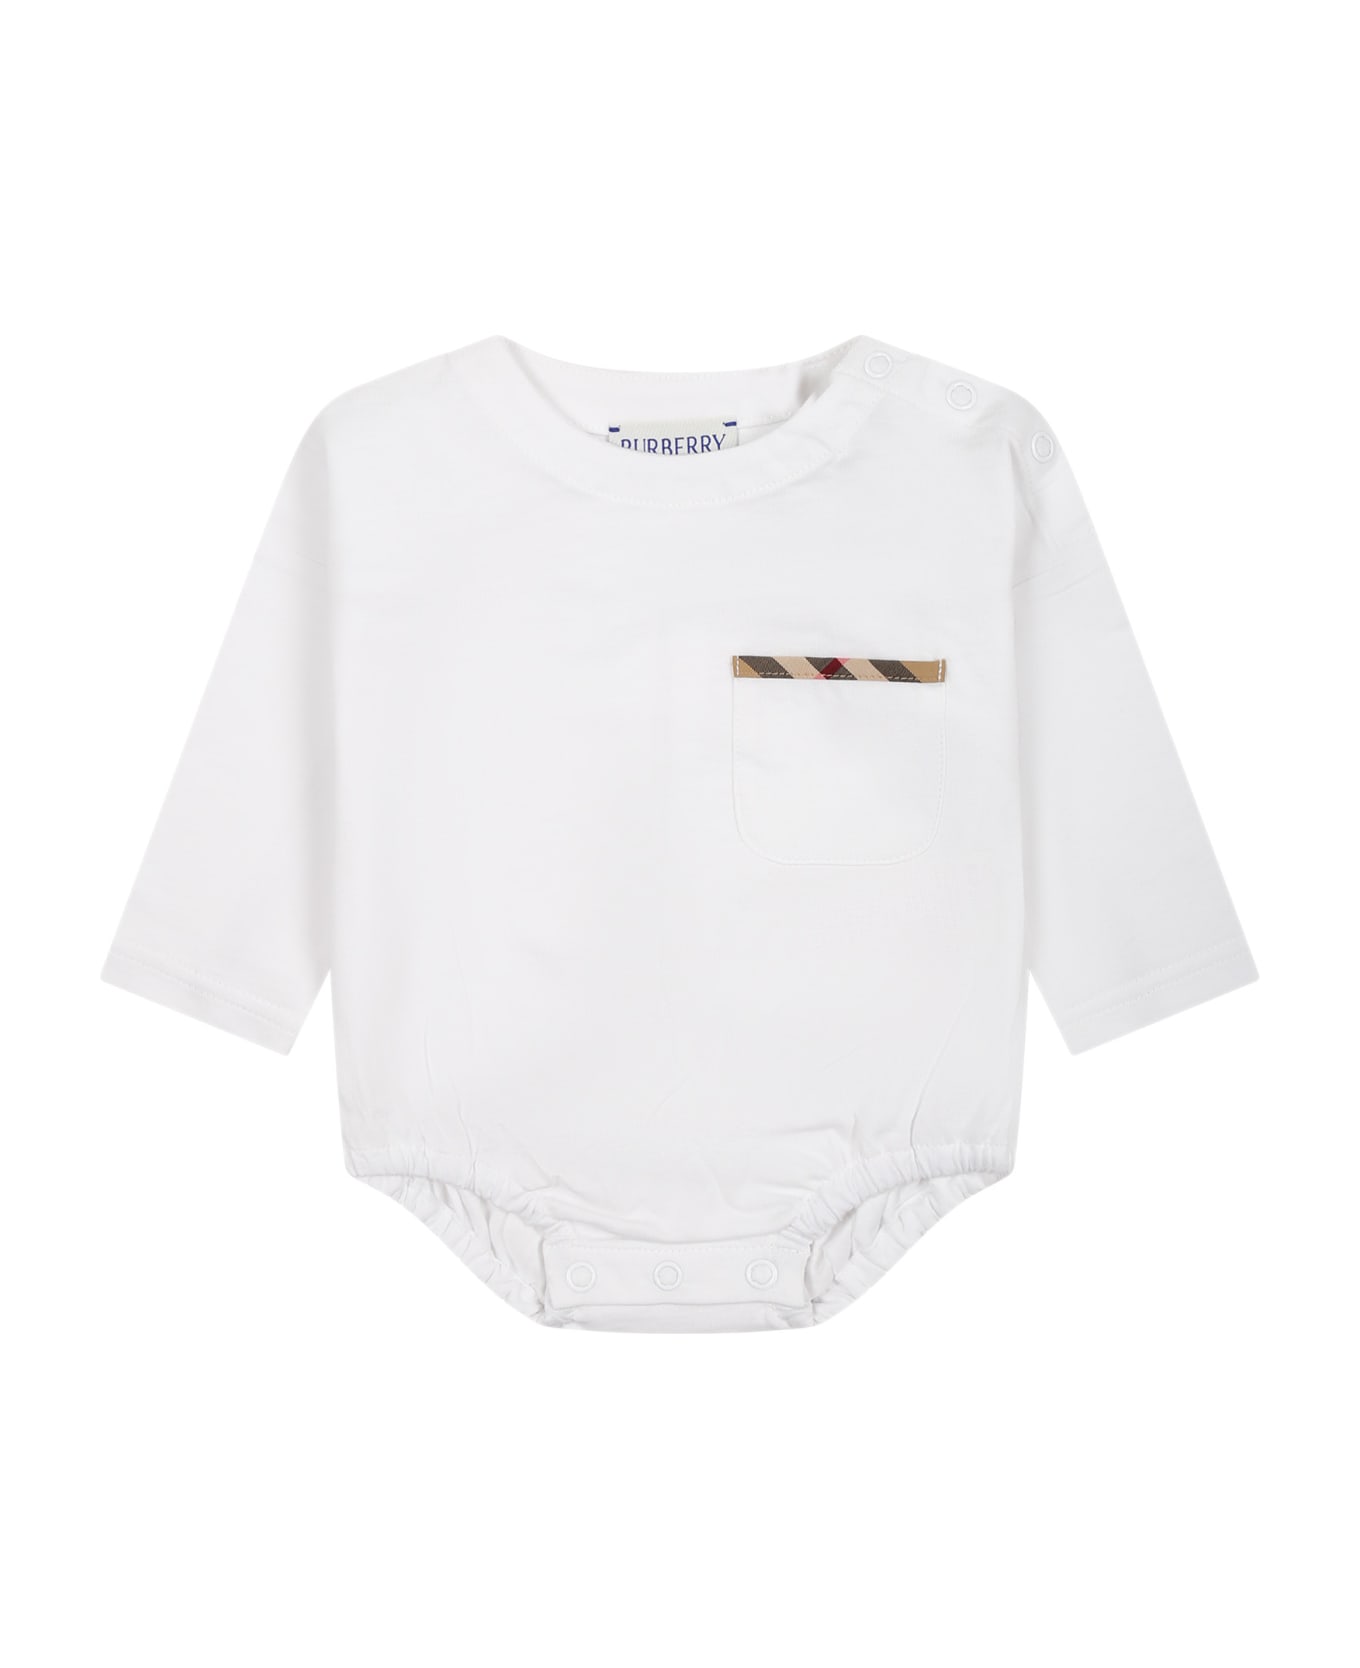 Burberry White Bodysuit For Babies With Vintage Check Detail On The Pocket